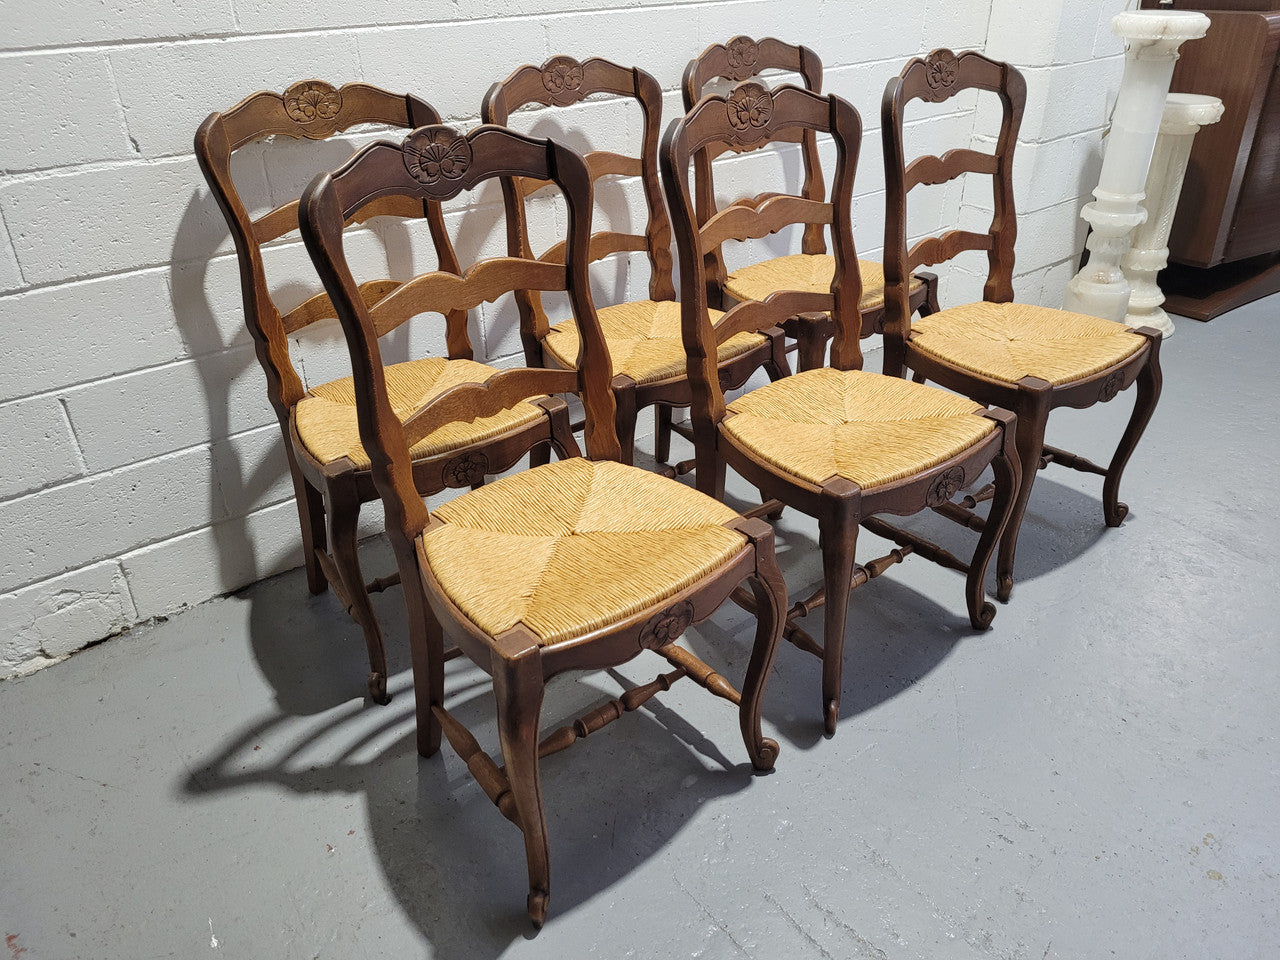 A stunning set of six French Louis XV Style oak dining chairs with rush seats in good original condition. All chairs have been detailed and re-glued where needed.